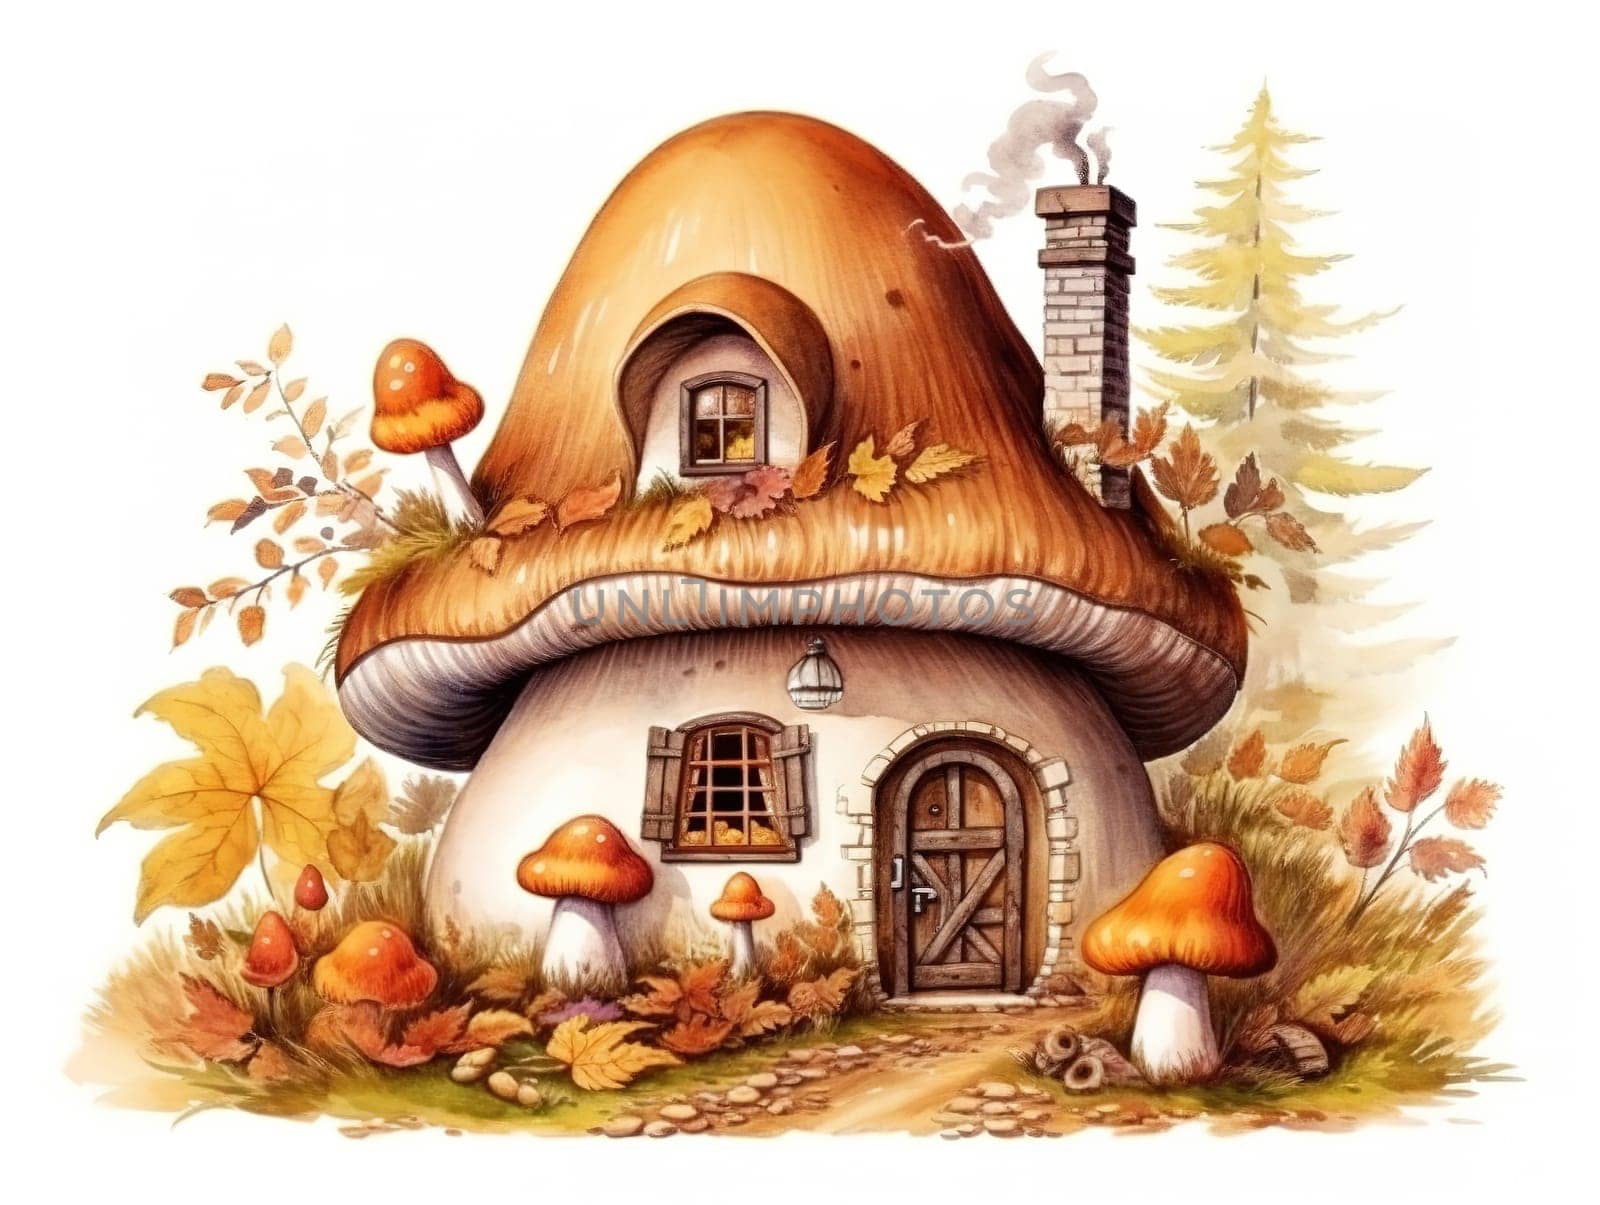 fairy house in the shape of a mushroom with a brown roof similar to the cap of a porcini mushroom, housing by KaterinaDalemans